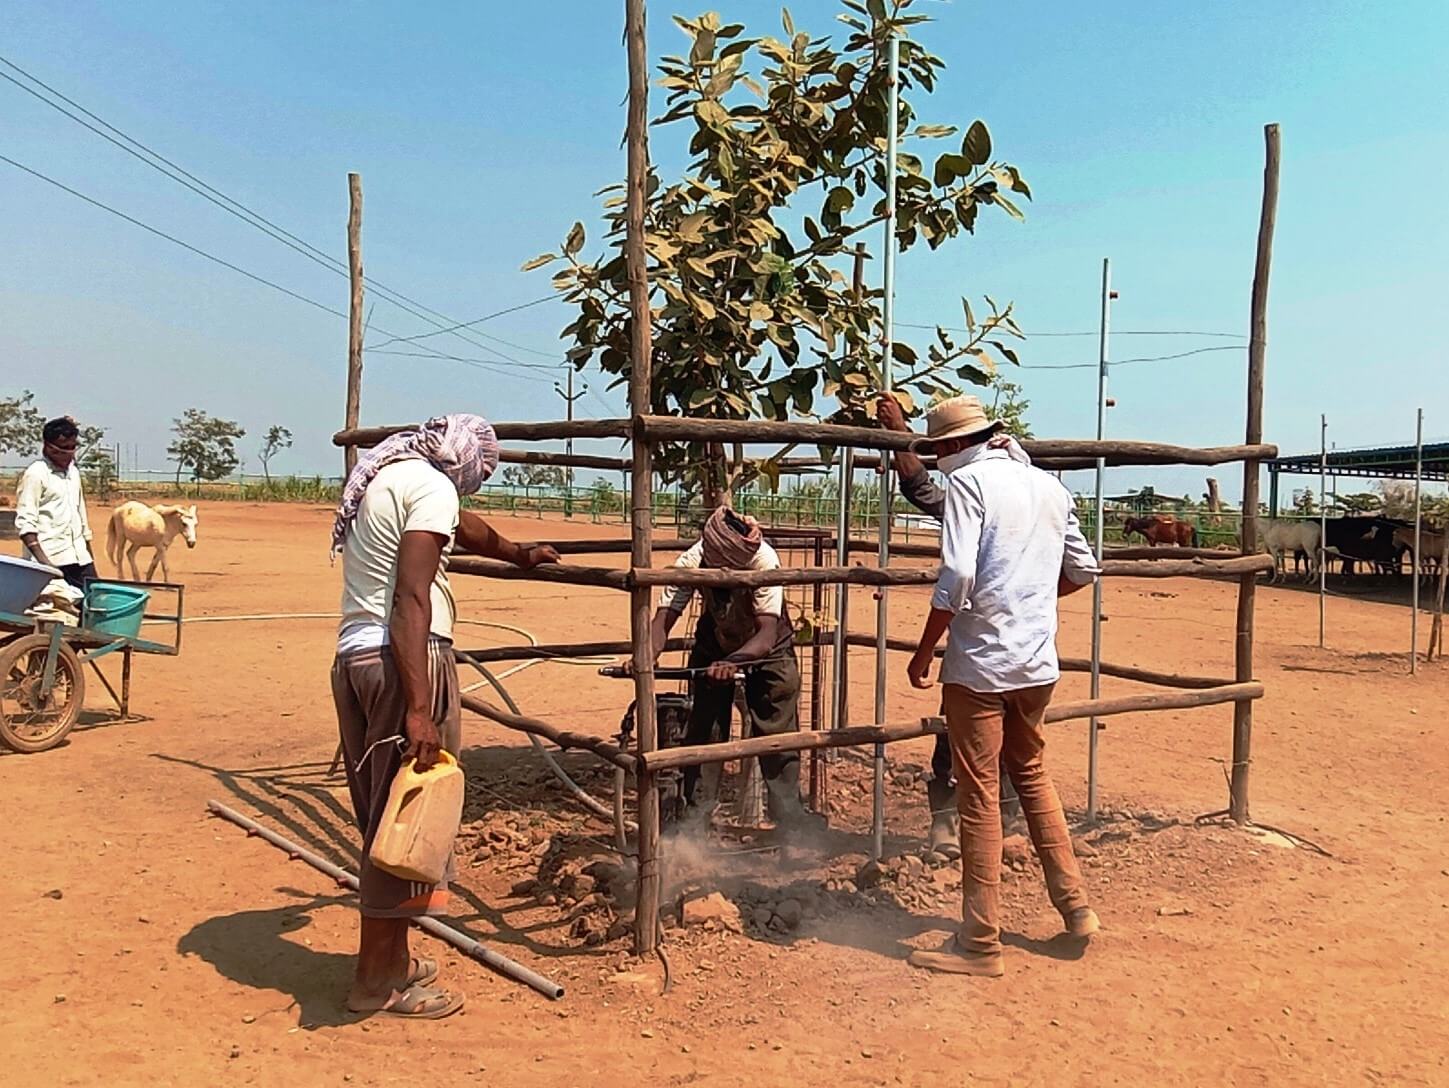 Animal Rahat sanctuary staff repair fencing around a young tree.